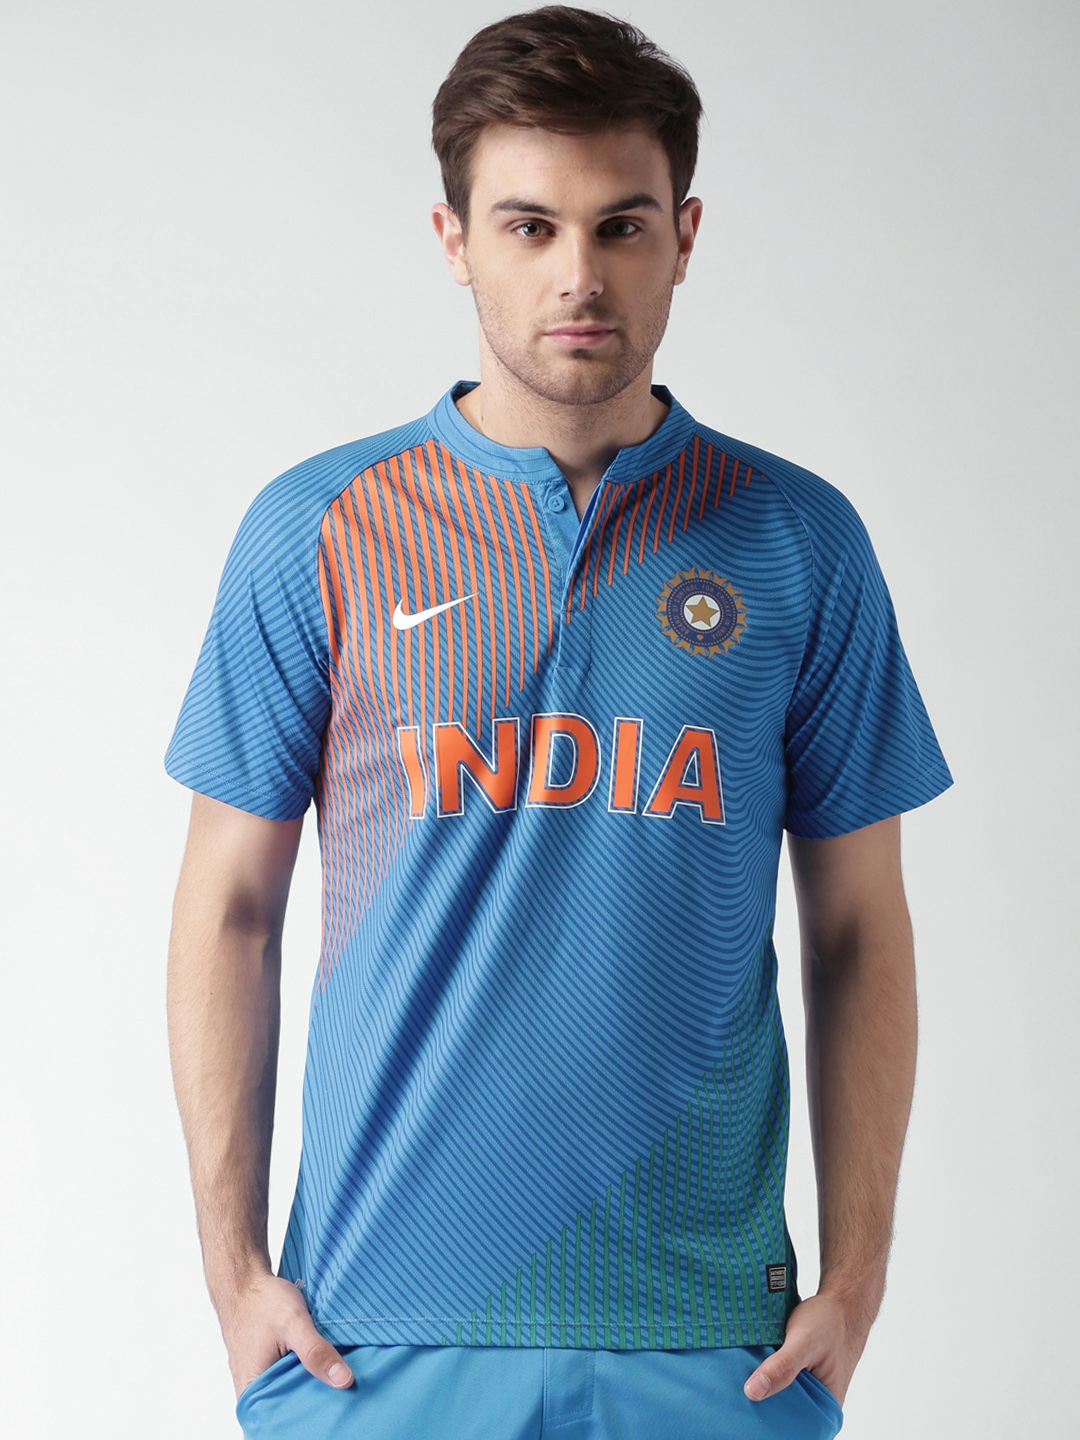 india t20 jersey